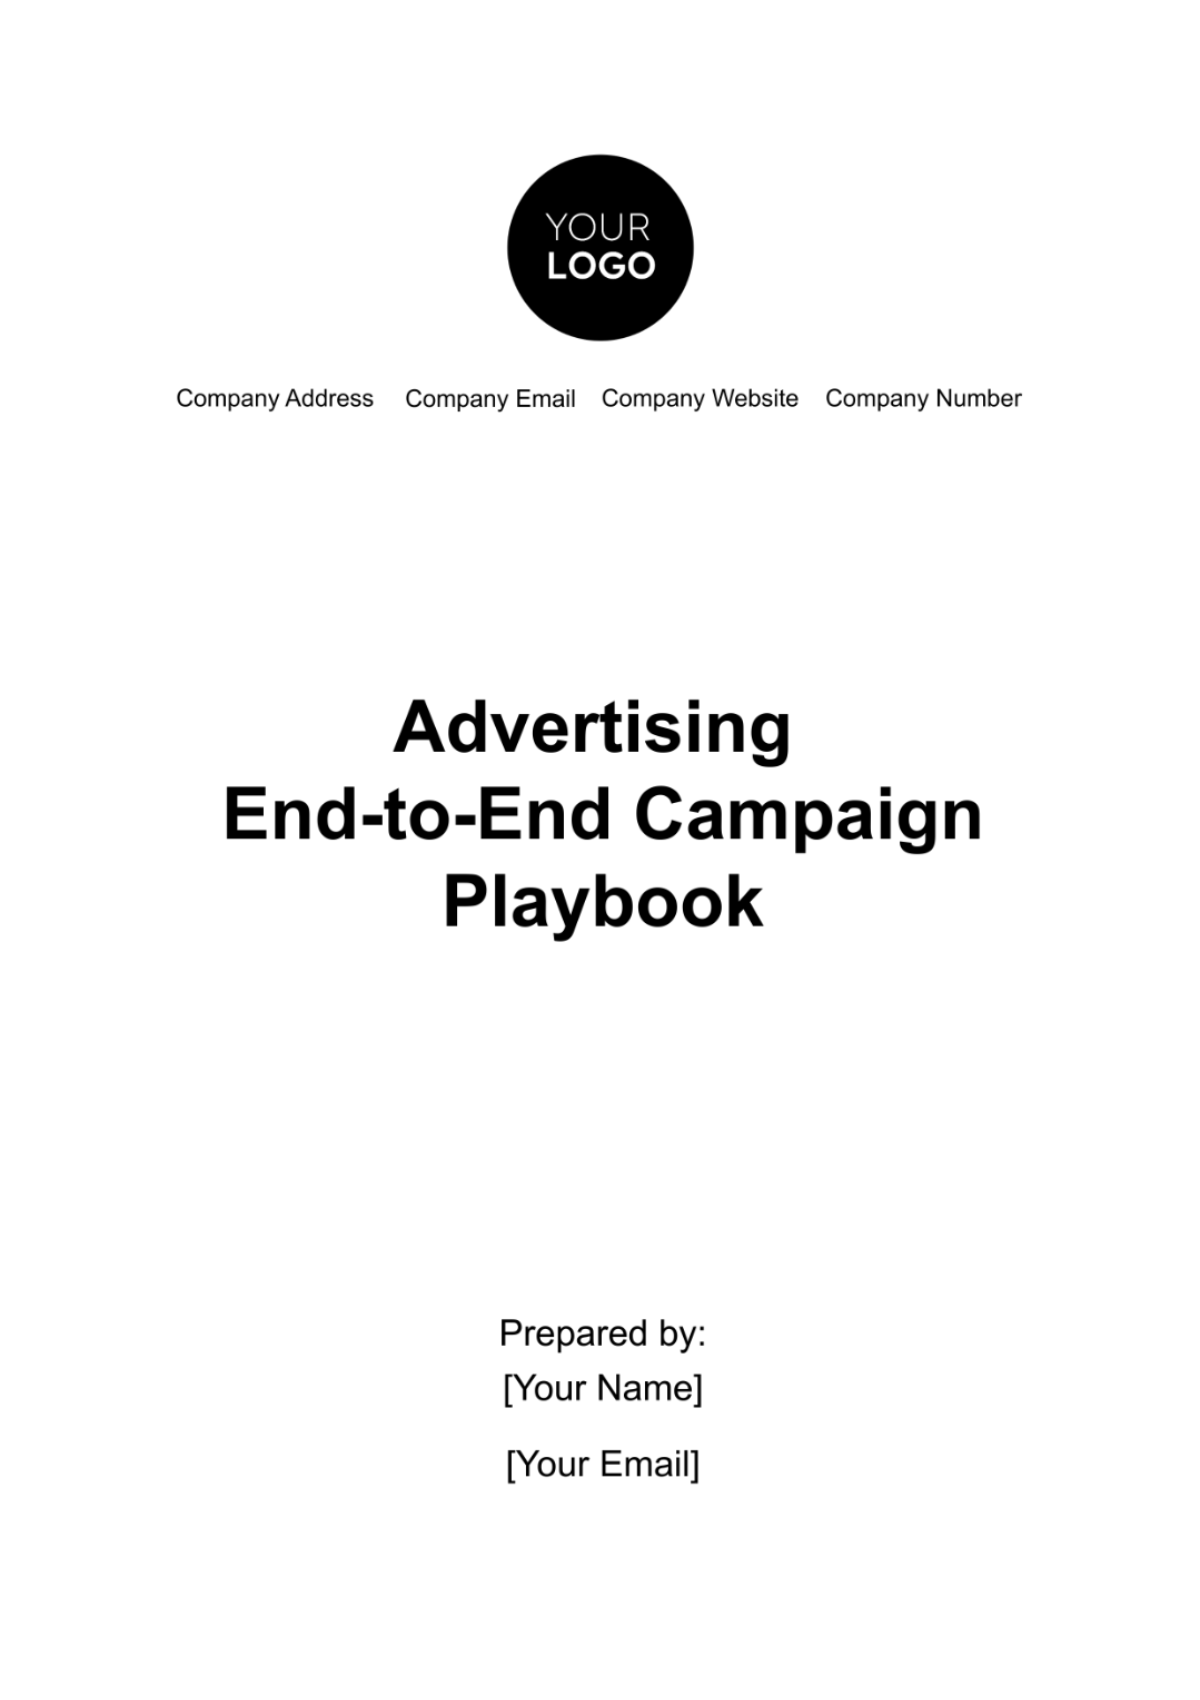 Free Advertising End-to-End Campaign Playbook Template